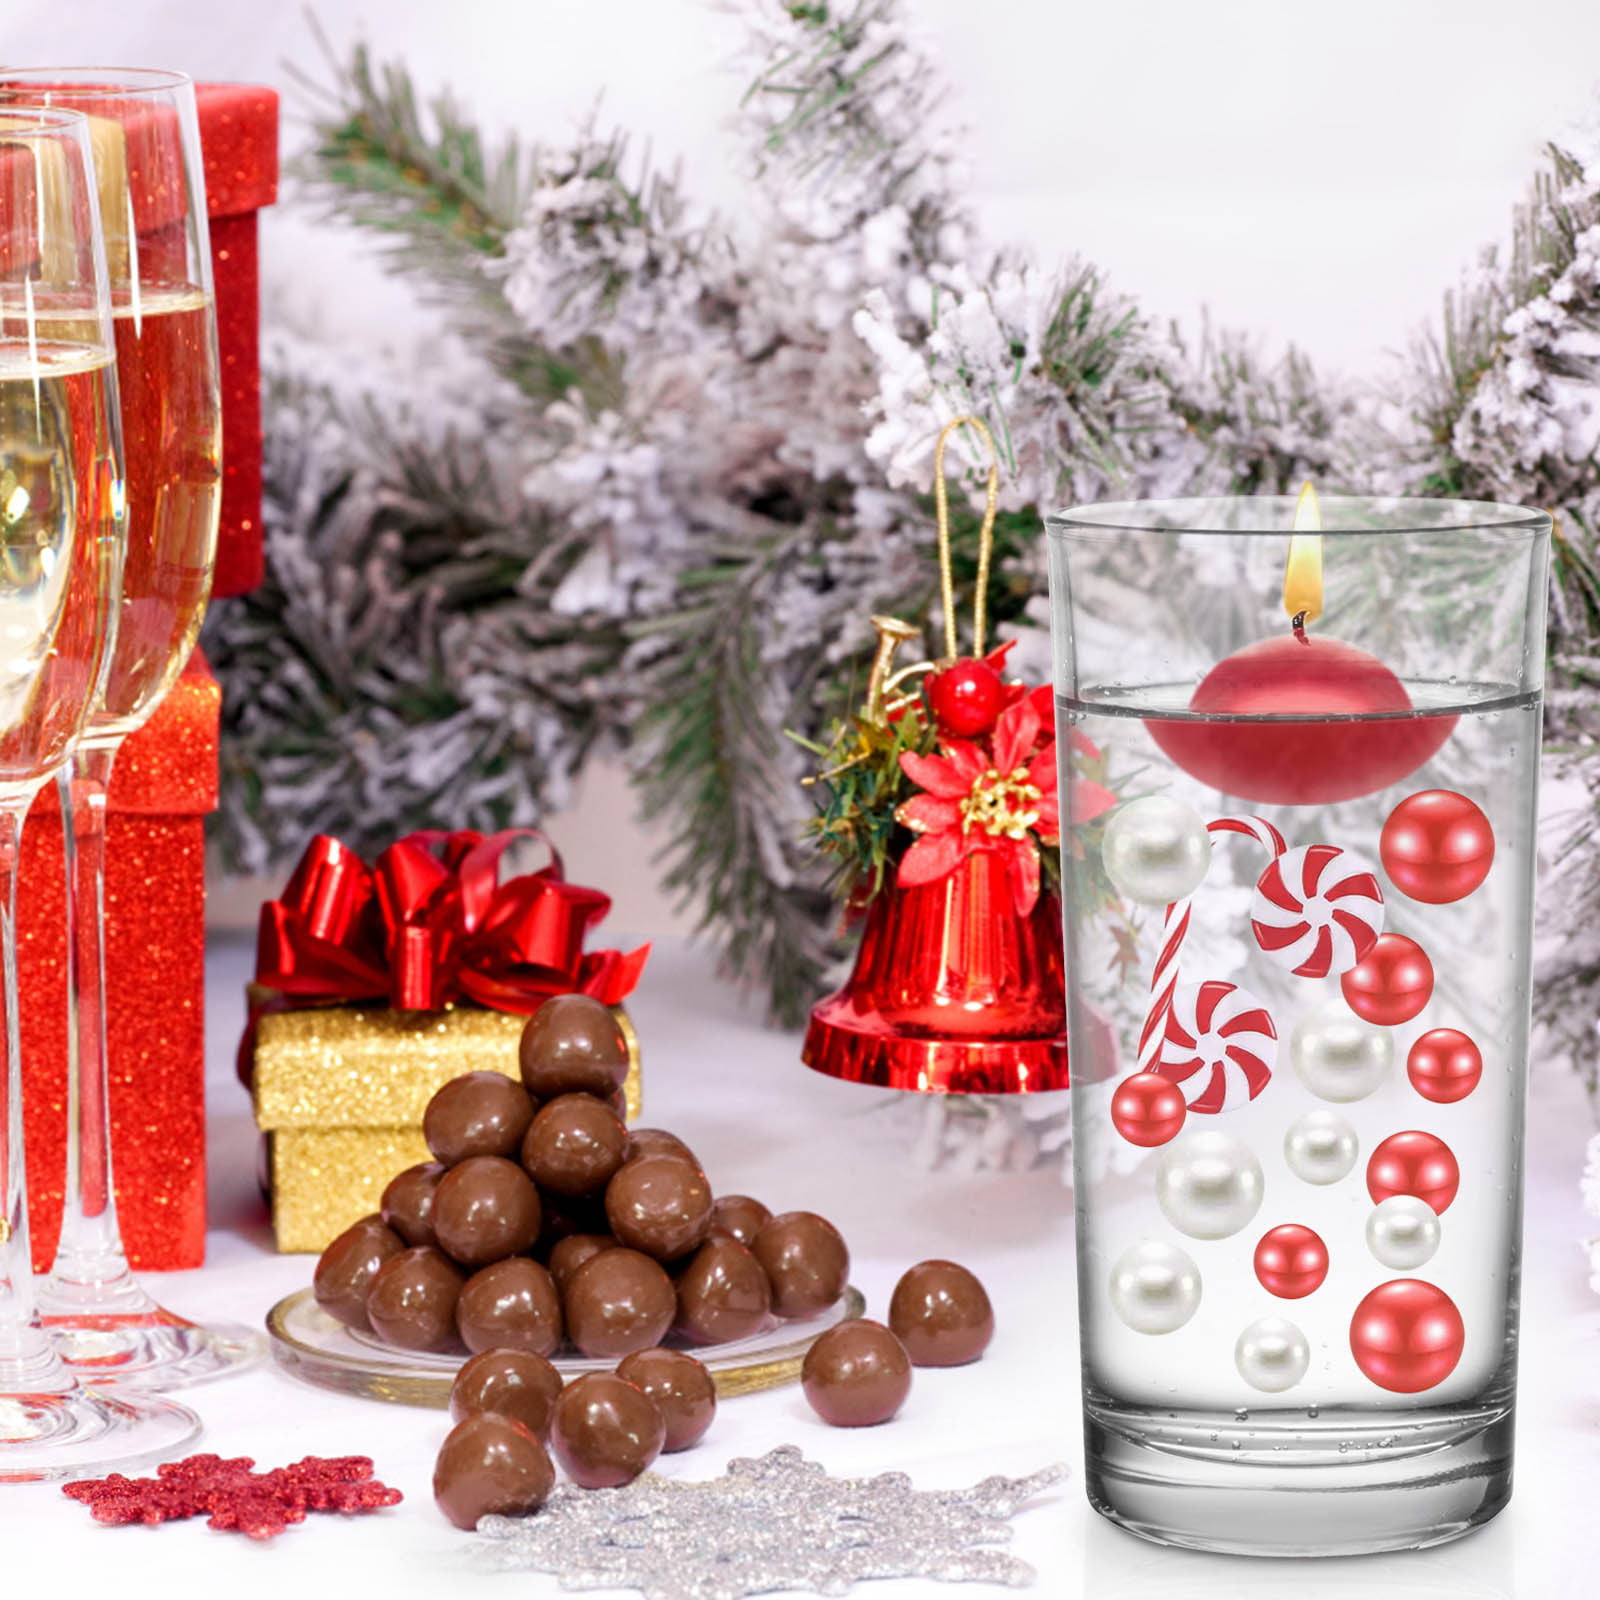 Chgbmok 6106Pcs Christmas Vase Filler Decor - Acrylic Snowflake Floating Pearls Clear Water Gel Beads DIY Crafts for Winter Holiday Table Centerpieces